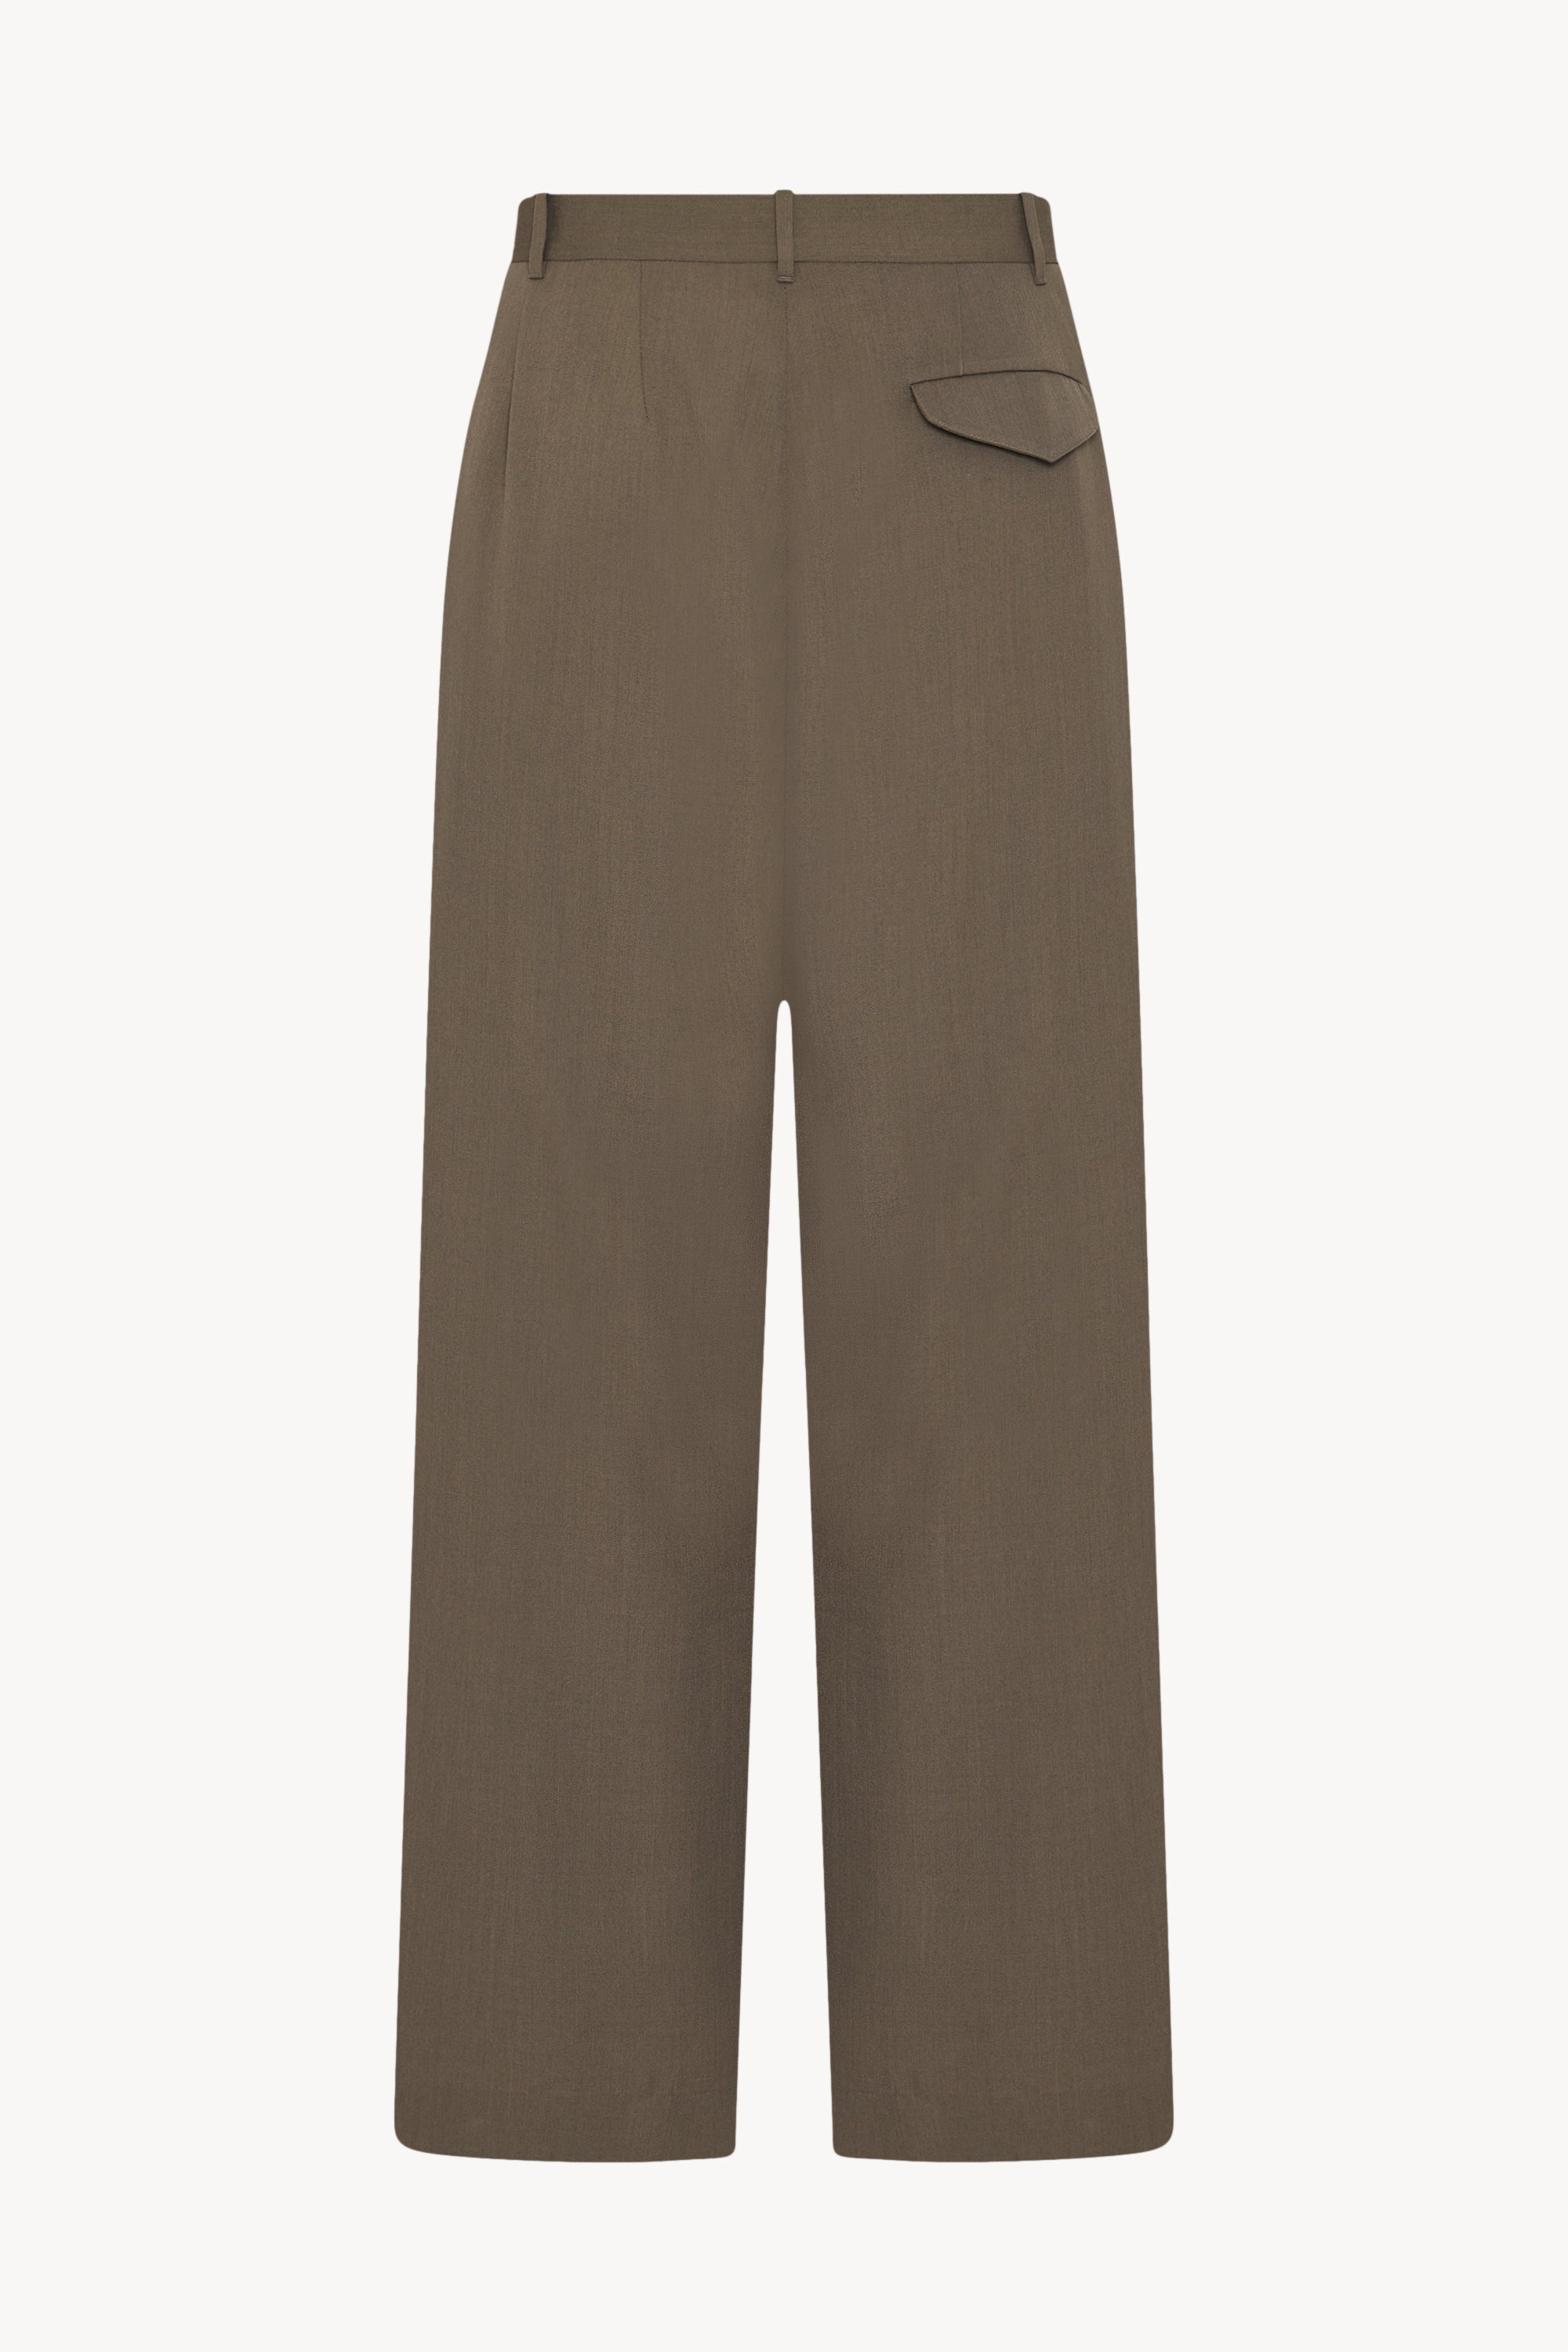 Rufus Pant in Polyester and Virgin Wool - 2